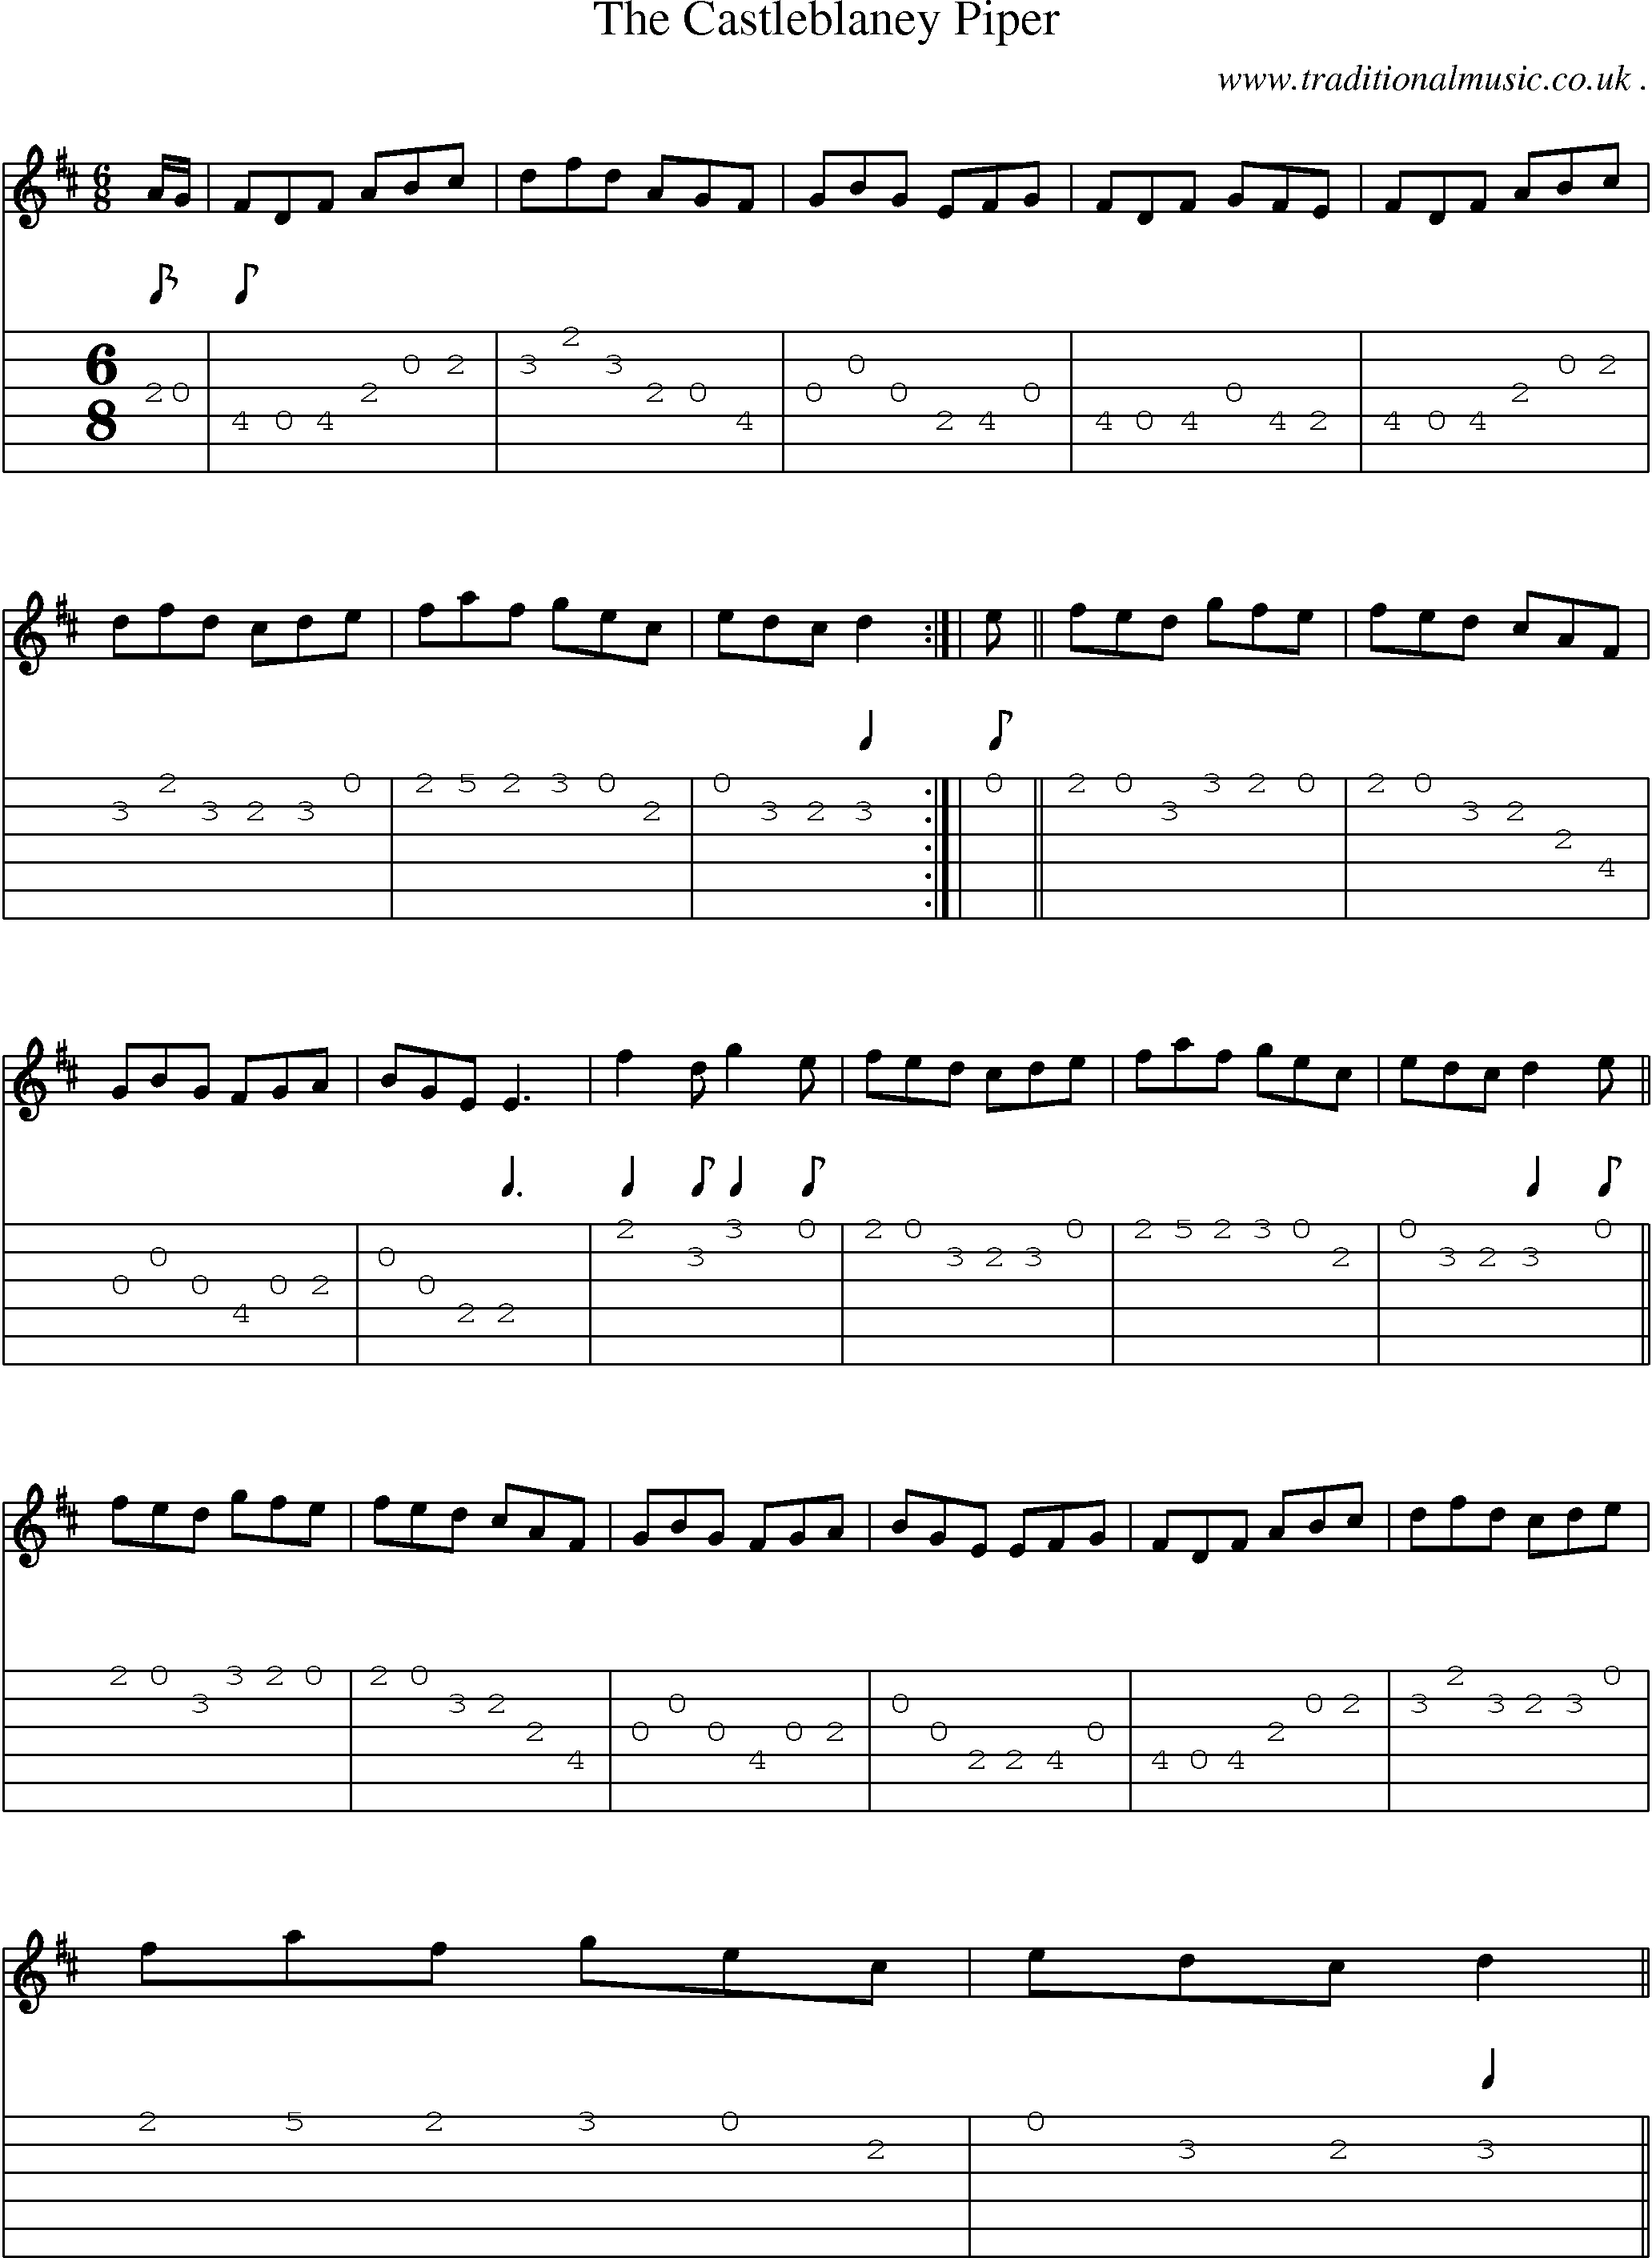 Sheet-Music and Guitar Tabs for The Castleblaney Piper